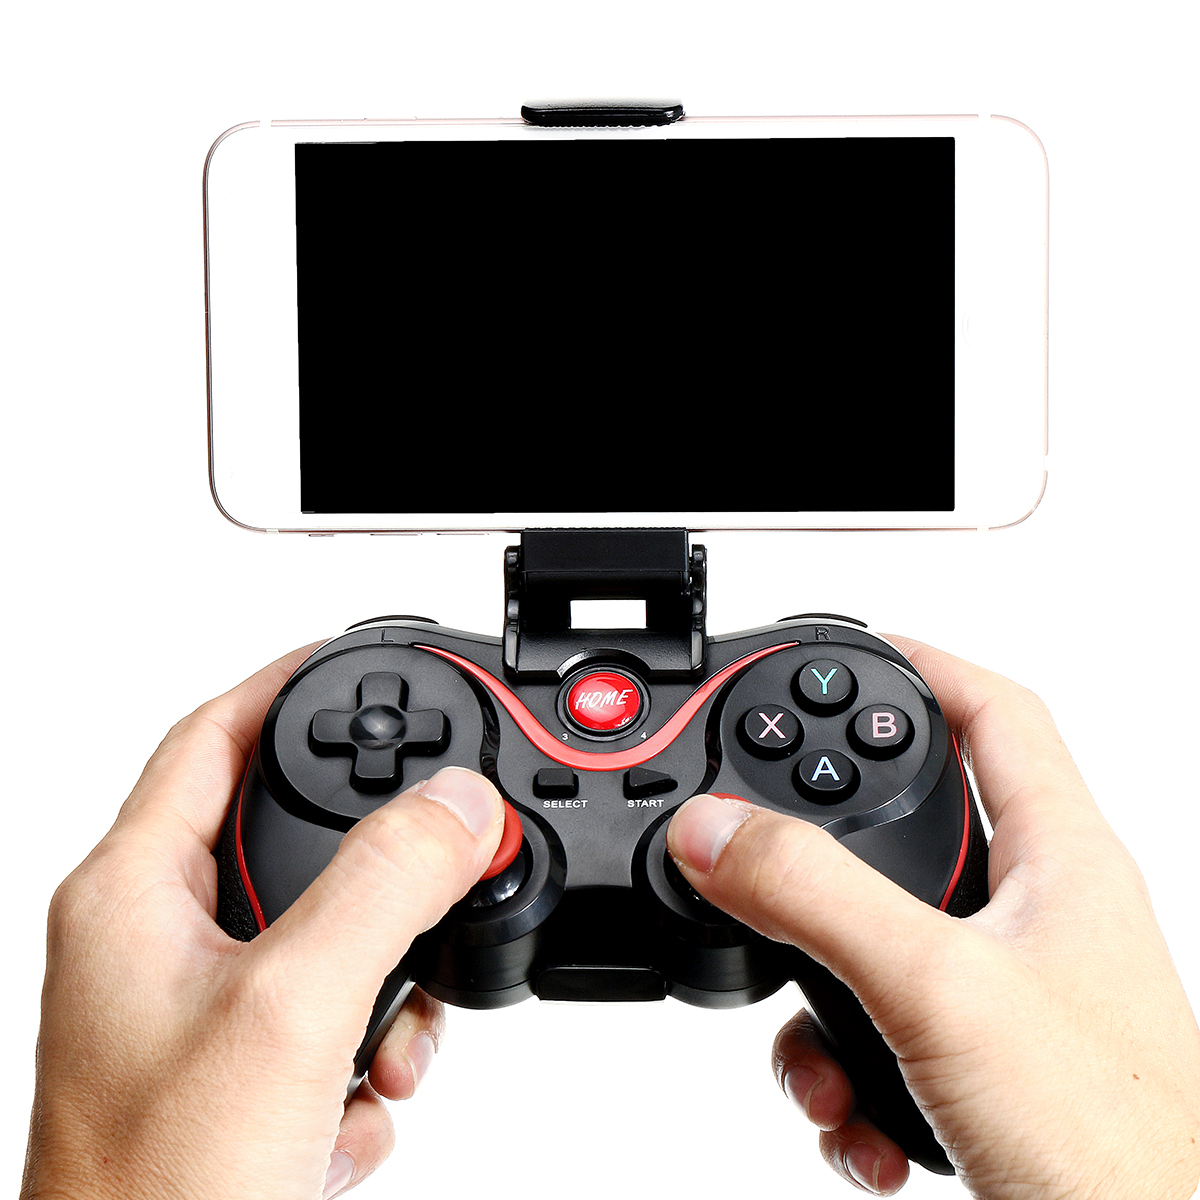 T3-bluetooth-Wireless-Gamepad-Gaming-Controller-for-iOS-Android-Mobile-Phone-Tablet-PC-VR-Glasses-Ga-1698597-5